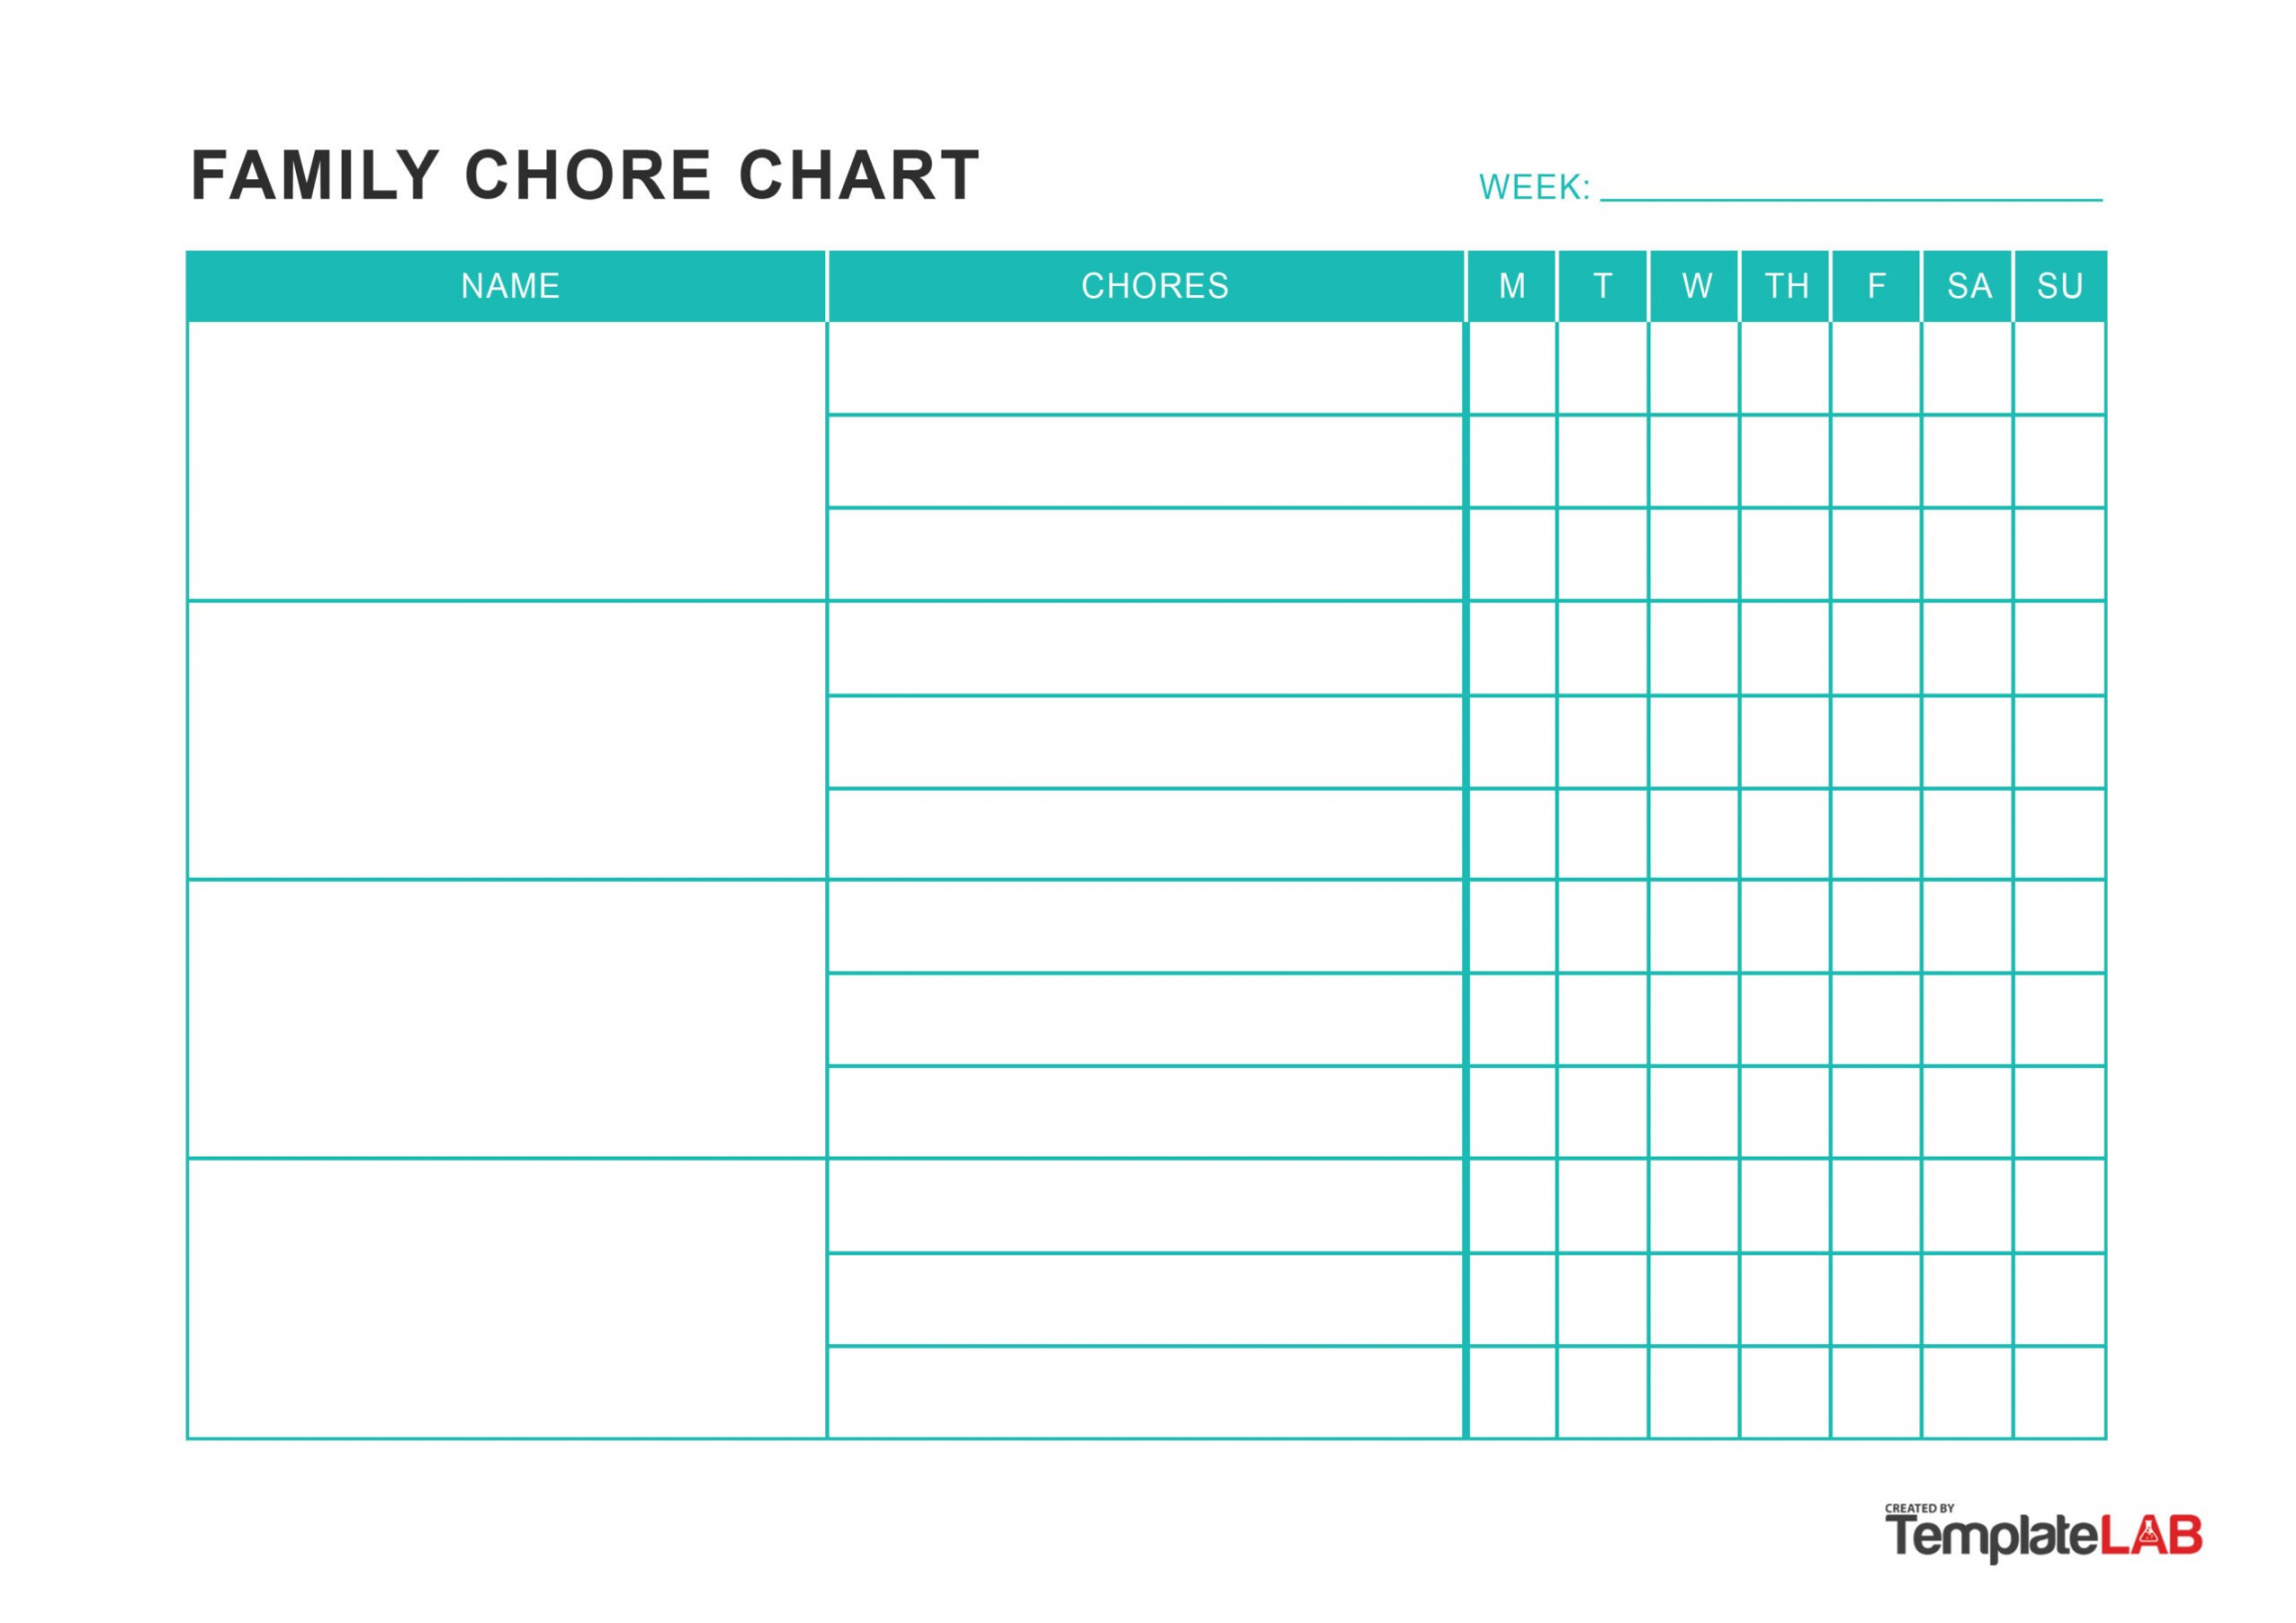 FREE Chore Chart Templates for Kids ᐅ TemplateLab - FREE Printables - Free Printable Weekly Chore Chart